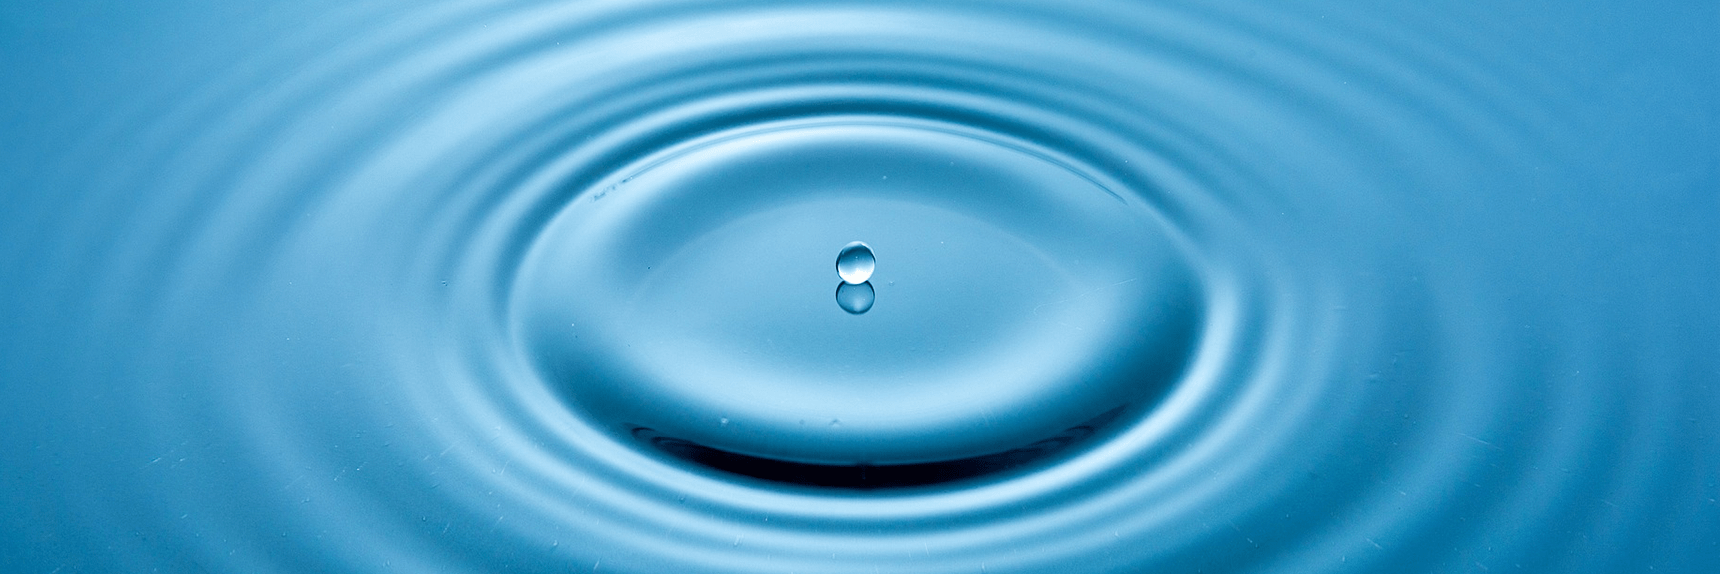 Droplet of water ripples the surface